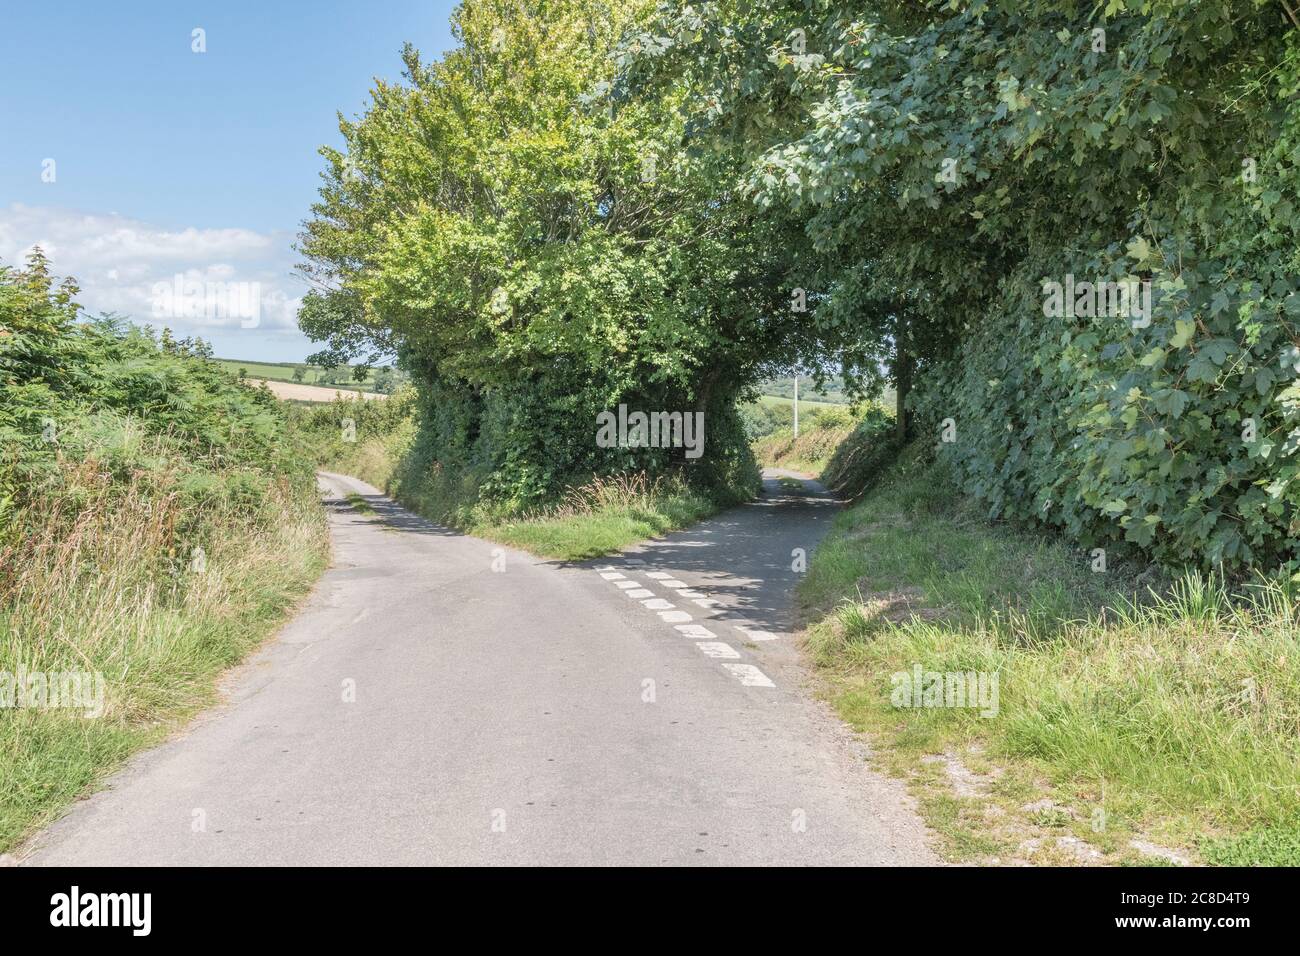 Forking country road in Cornwall, UK, and hedgerows. Metaphor route to take, choices, left or right, what lies ahead, diverging, alternative route. Stock Photo